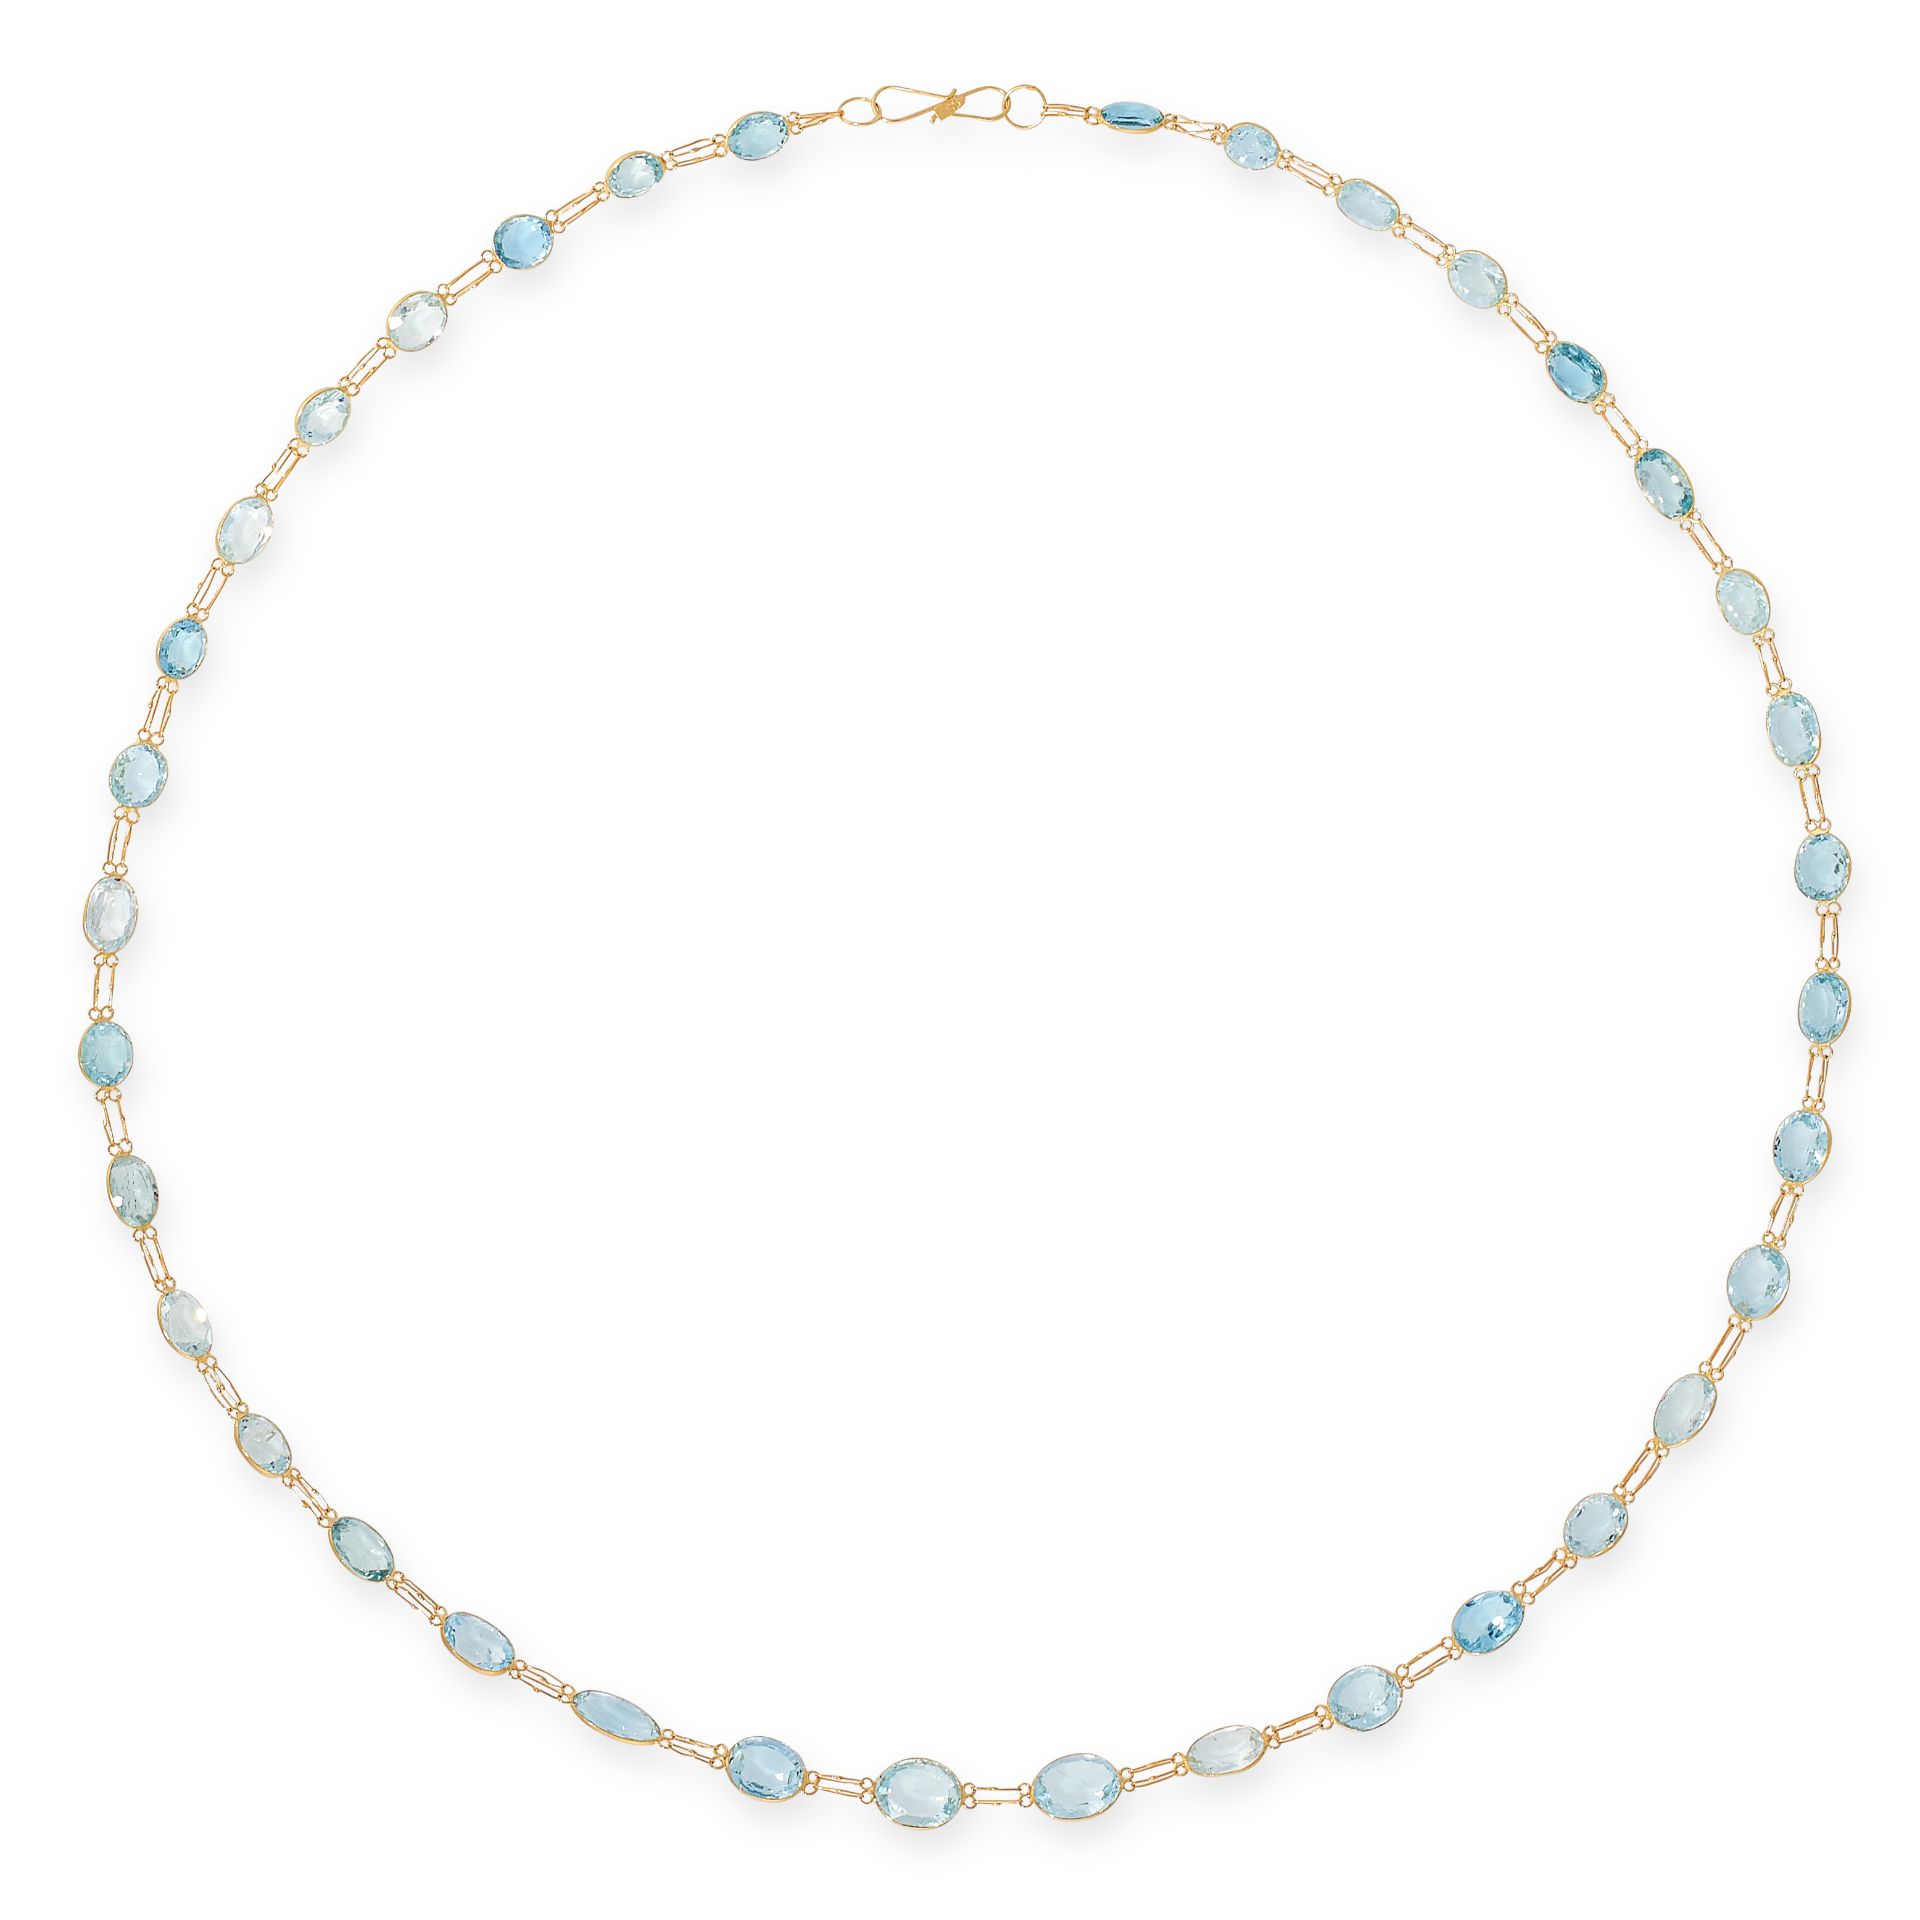 AN AQUAMARINE CHAIN NECKLACE comprising of a single row of oval cut aquamarines between fine chain